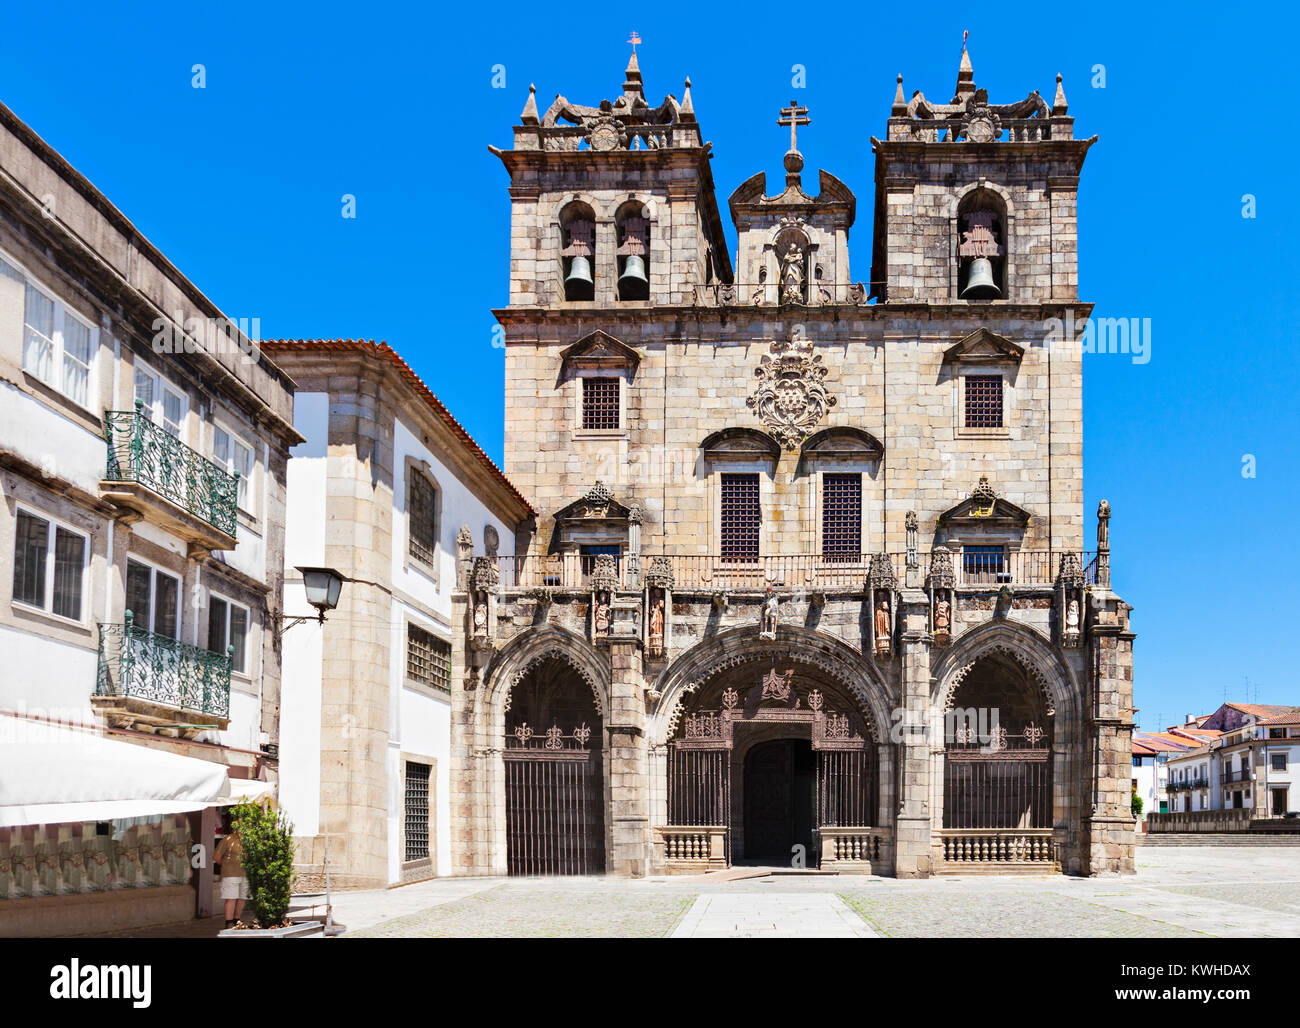 BRAGA, PORTUGAL - JULY 11: The Cathedral of Braga (Se de Braga) is one of the most important monuments in Braga, Portugal on July 11, 2014 in Braga, P Stock Photo